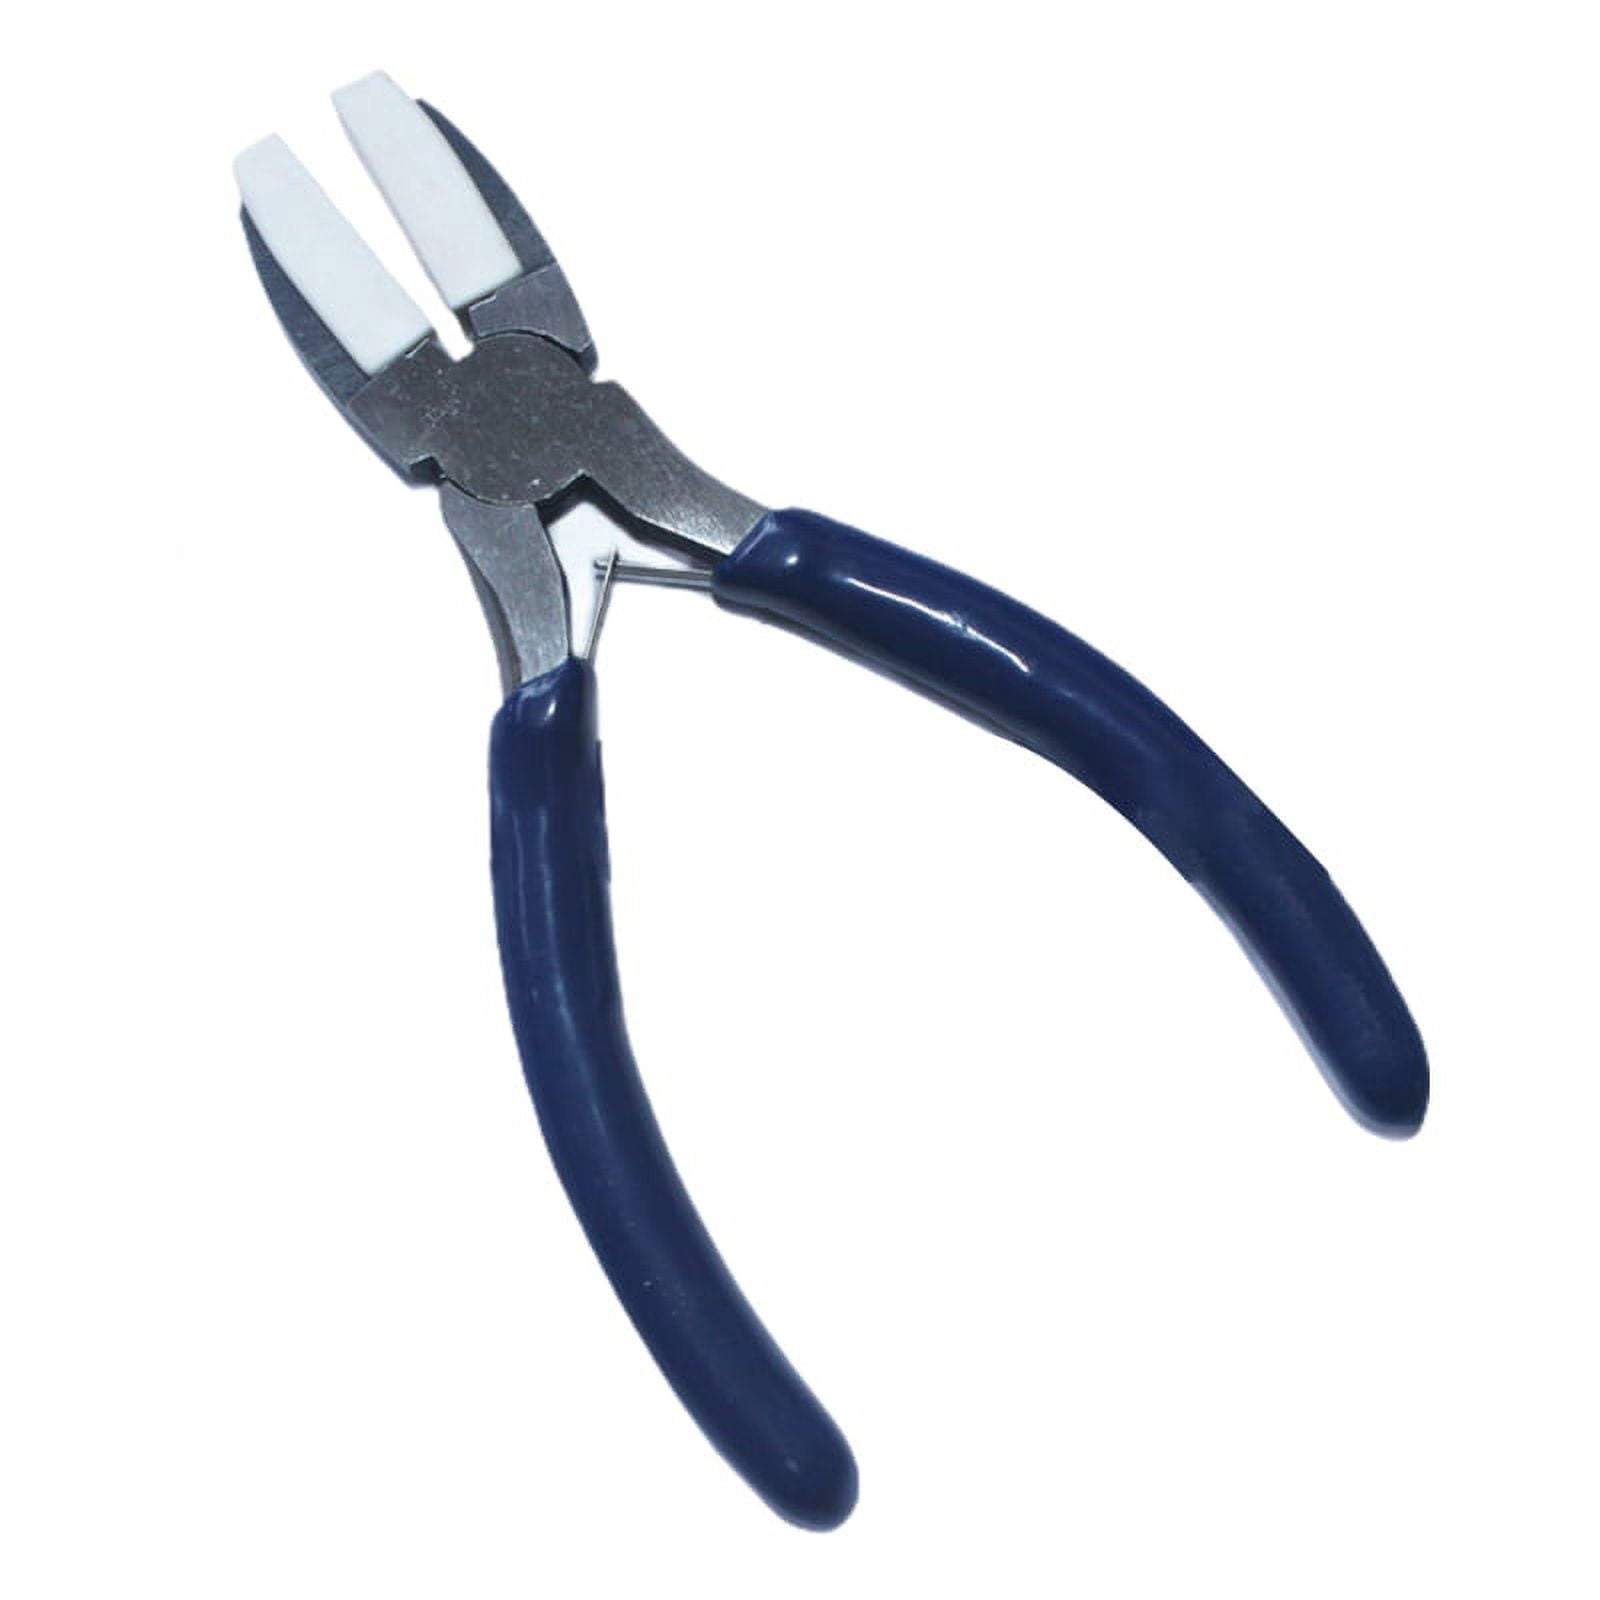 JEWEL TOOL 7.5 (19.1 cm) Flat Nose Pliers | Wide Blades for Metal Sheets |  Ideal for Jewelers and Small Tasks in Welding & Blacksmithing | Forged